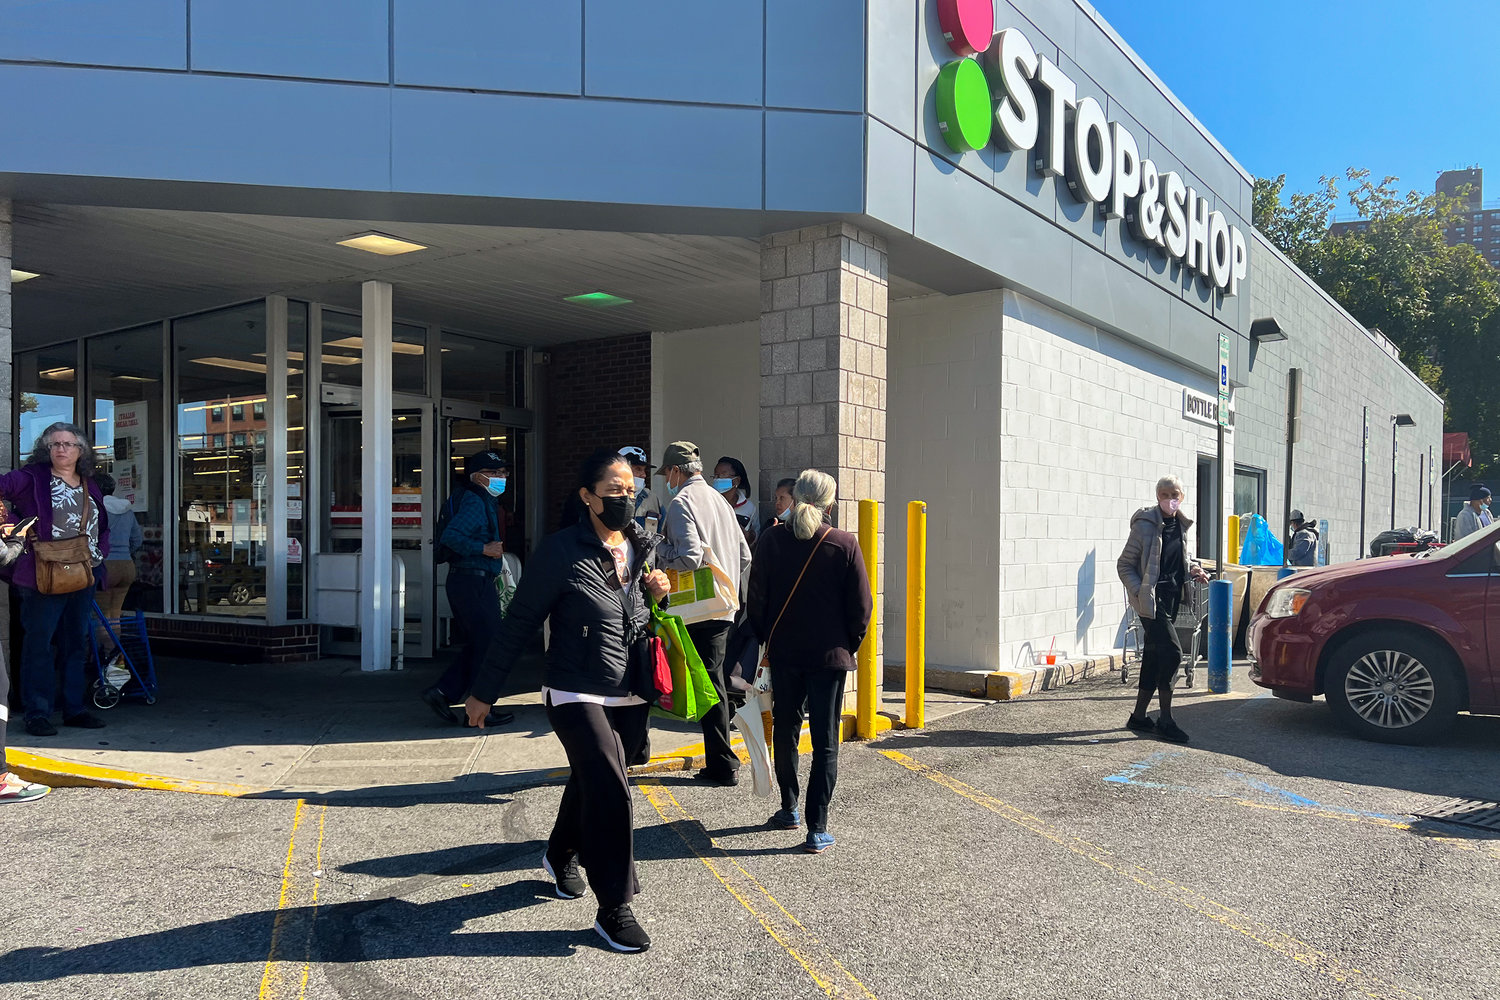 Marble Hill Senior Center took a 1-mile walk to Shop & Stop on Oct. 11. There seniors they learned about exercise and produce with high potassium that reduces high blood pressure.